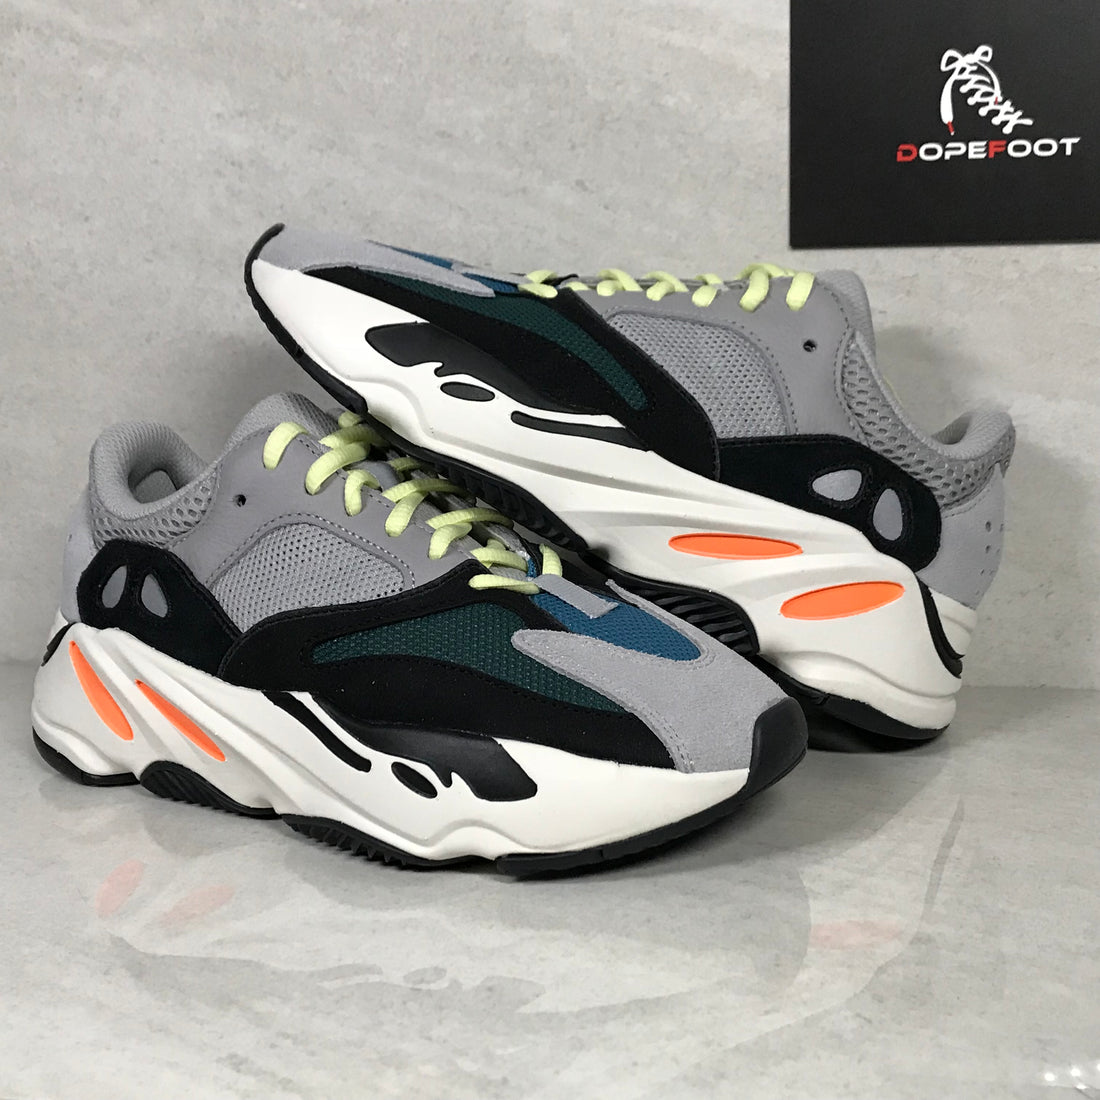 Adidas Yeezy Boost 700 Wave Runner Real vs Fake Guide - Photos, Videos, and Notes